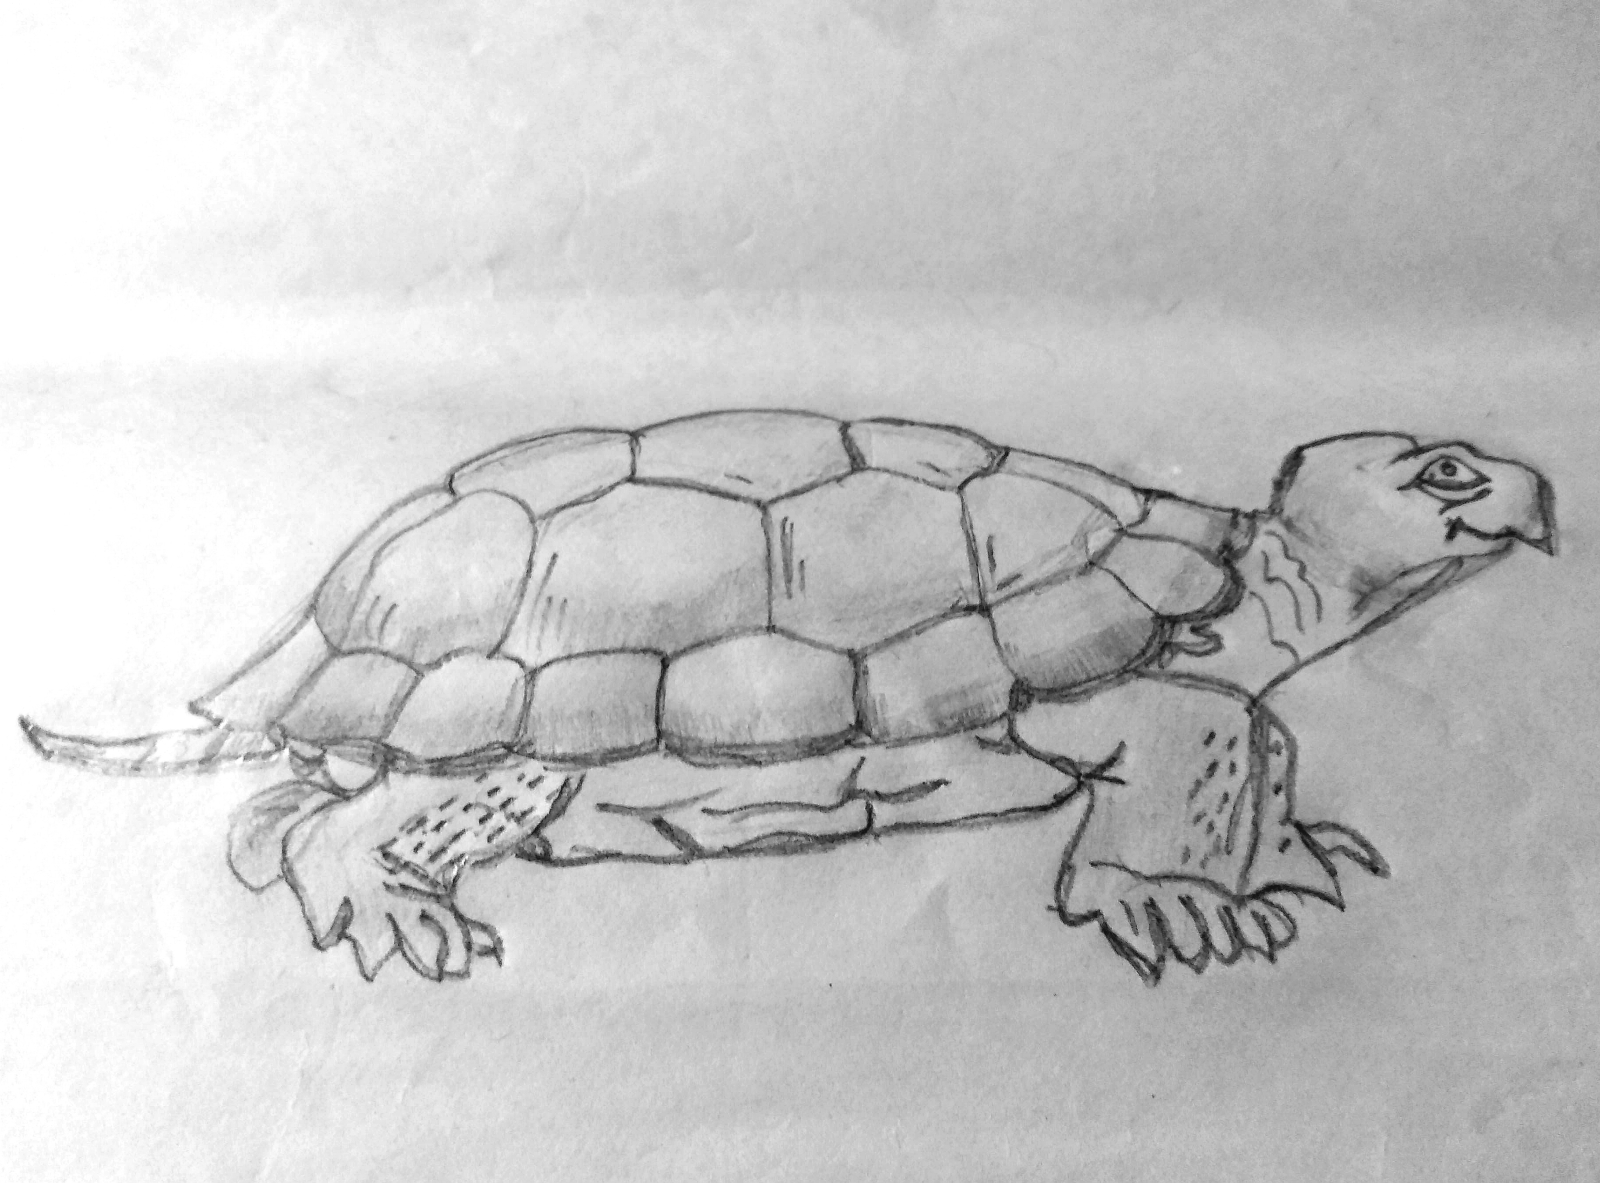 How to draw tortoise. Step-by-step tutorial.